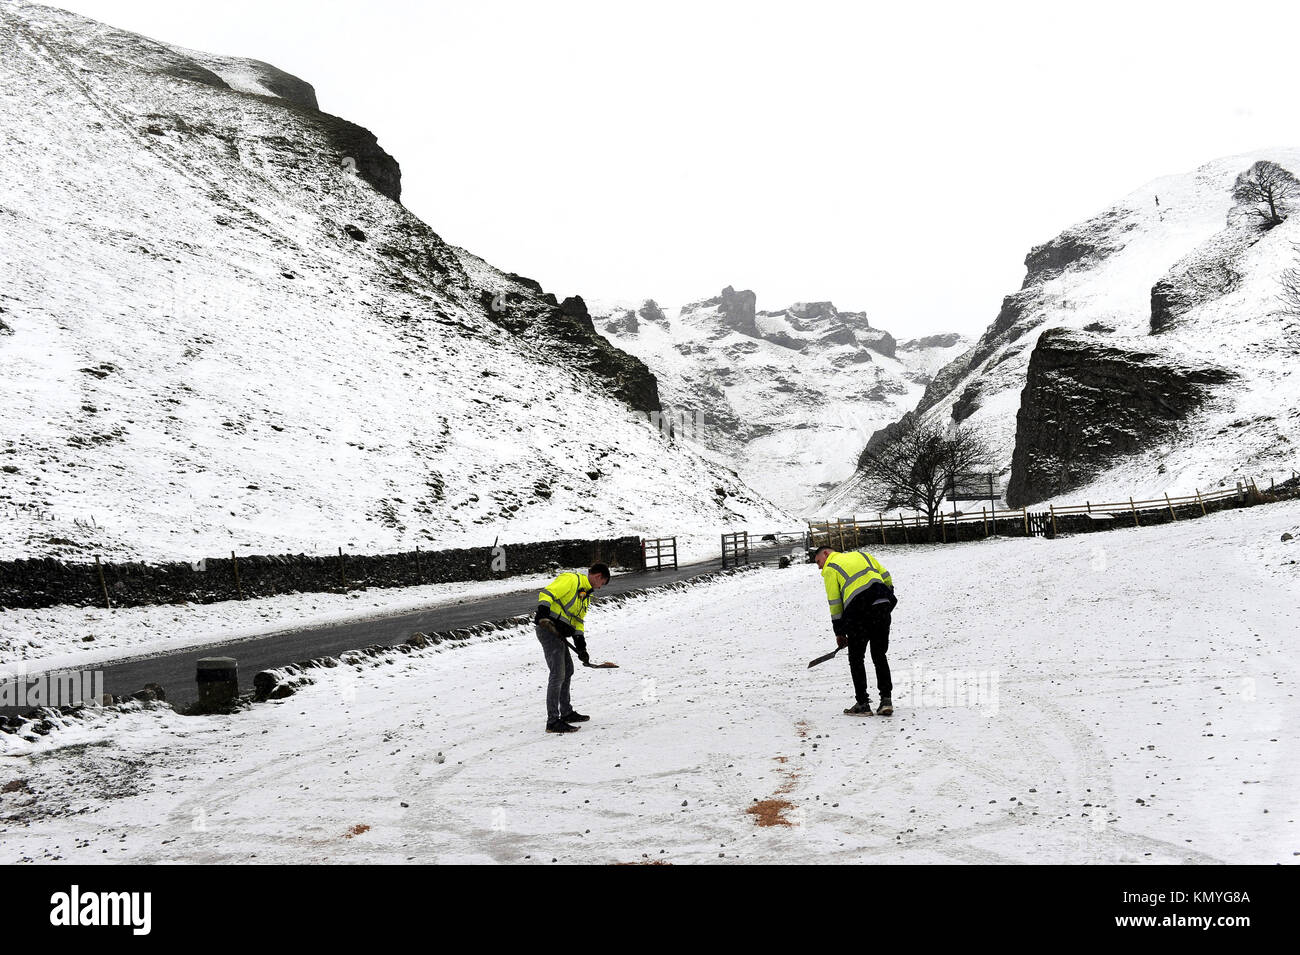 Car parks are gritted at Winnats Pass in the Peak District, as widespread disruption is expected as snow continues to fall across large parts of the UK, with forecasters warning some communities could be cut off as temperatures plummet. Stock Photo